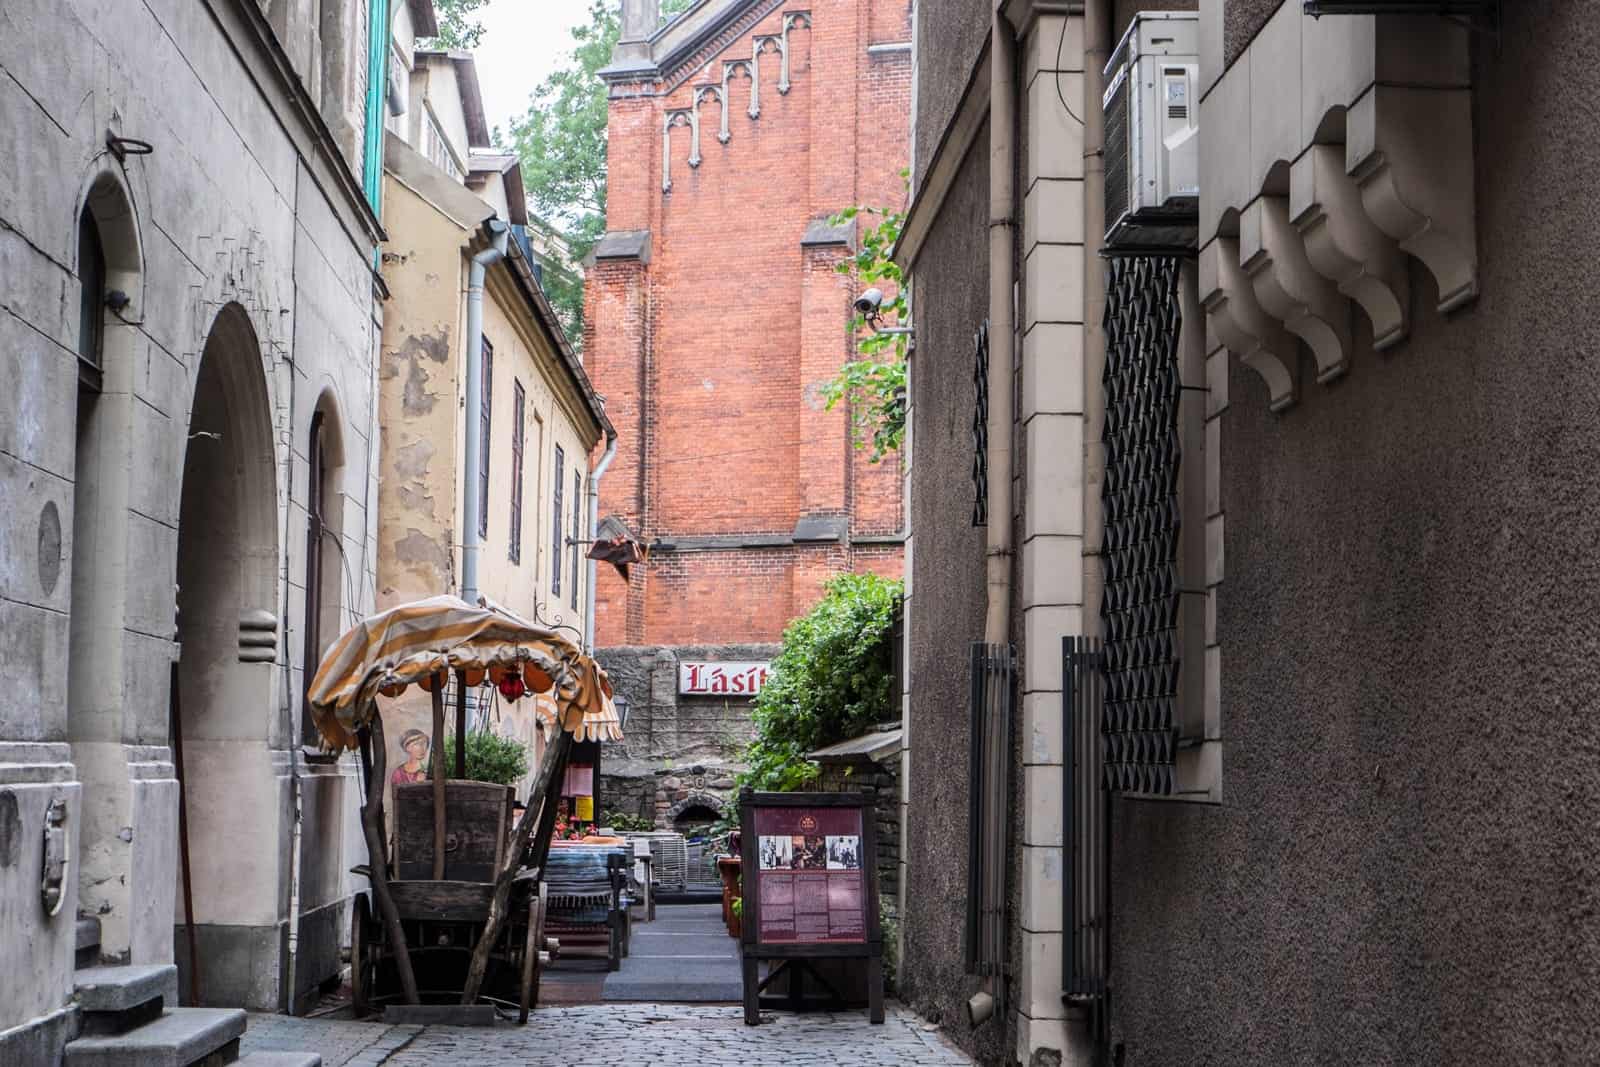 Hidden cafe in a side street in Riga Old Town